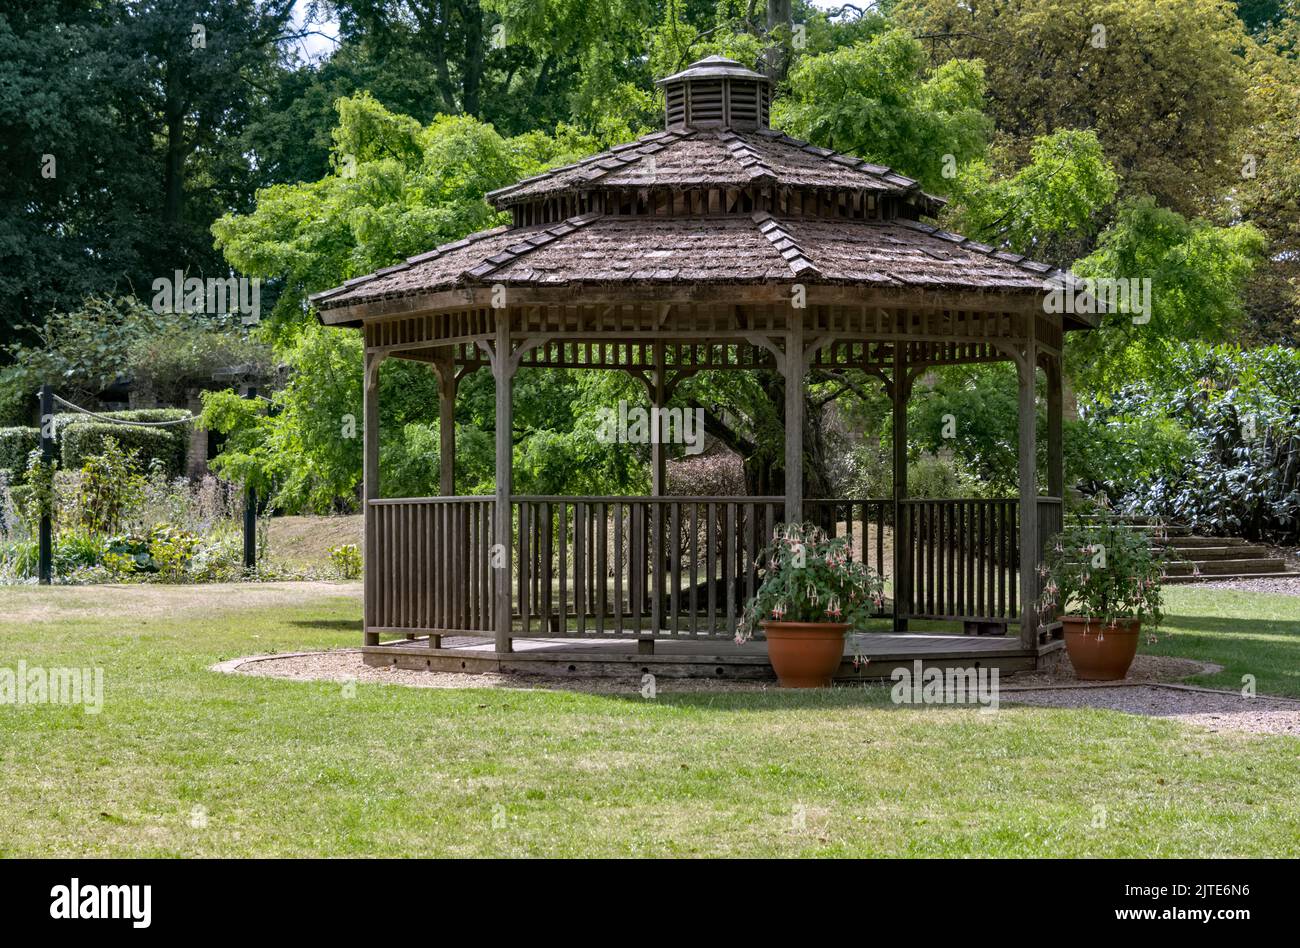 Wooden Gazebo with slate roof in the gardens of Knebworth House UK Stock Photo